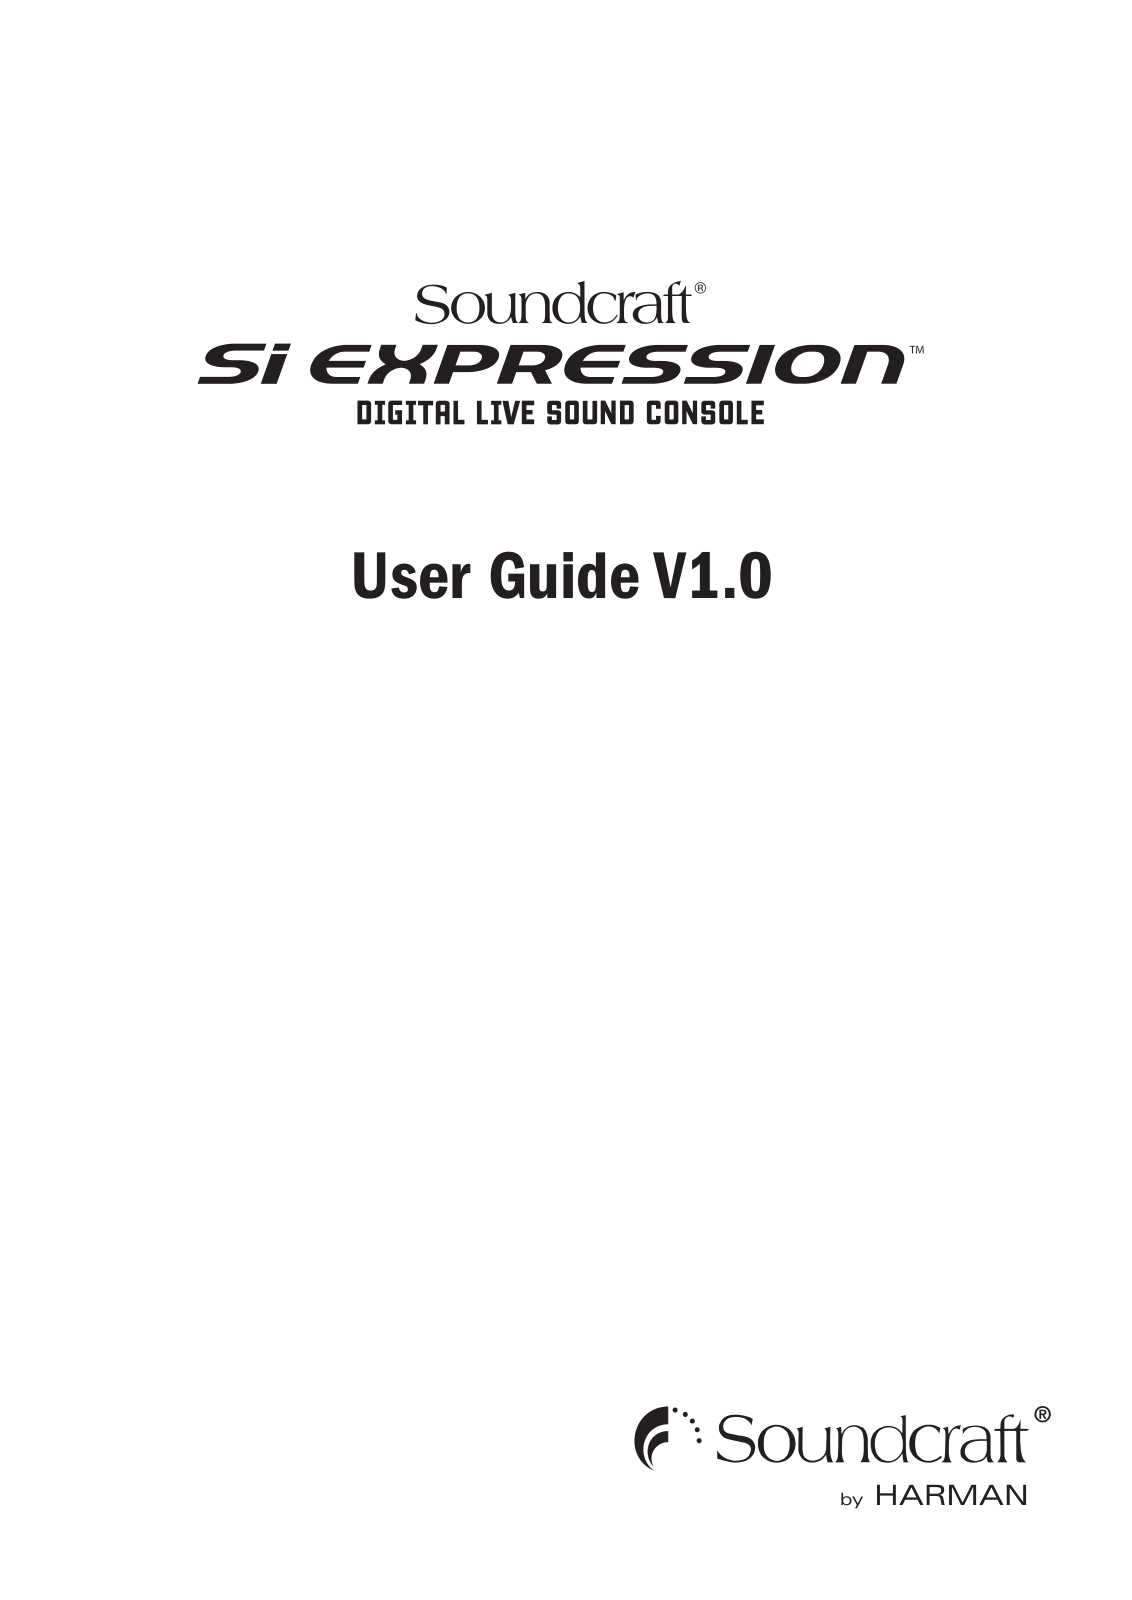 Soundcraft SI EXPRESSION USER GUIDE